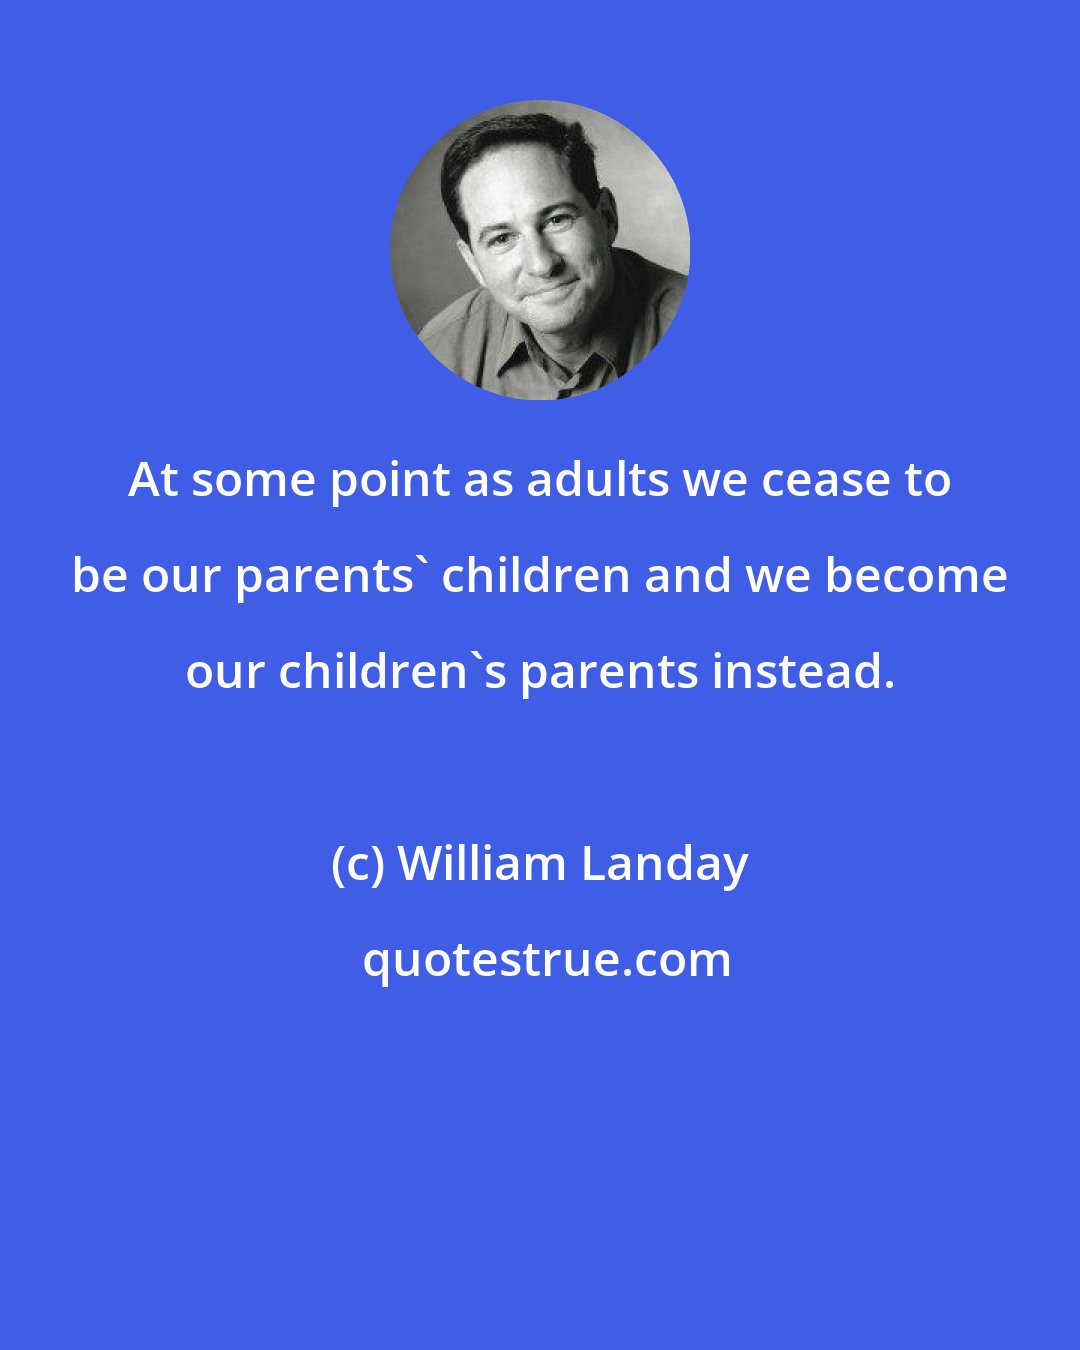 William Landay: At some point as adults we cease to be our parents' children and we become our children's parents instead.